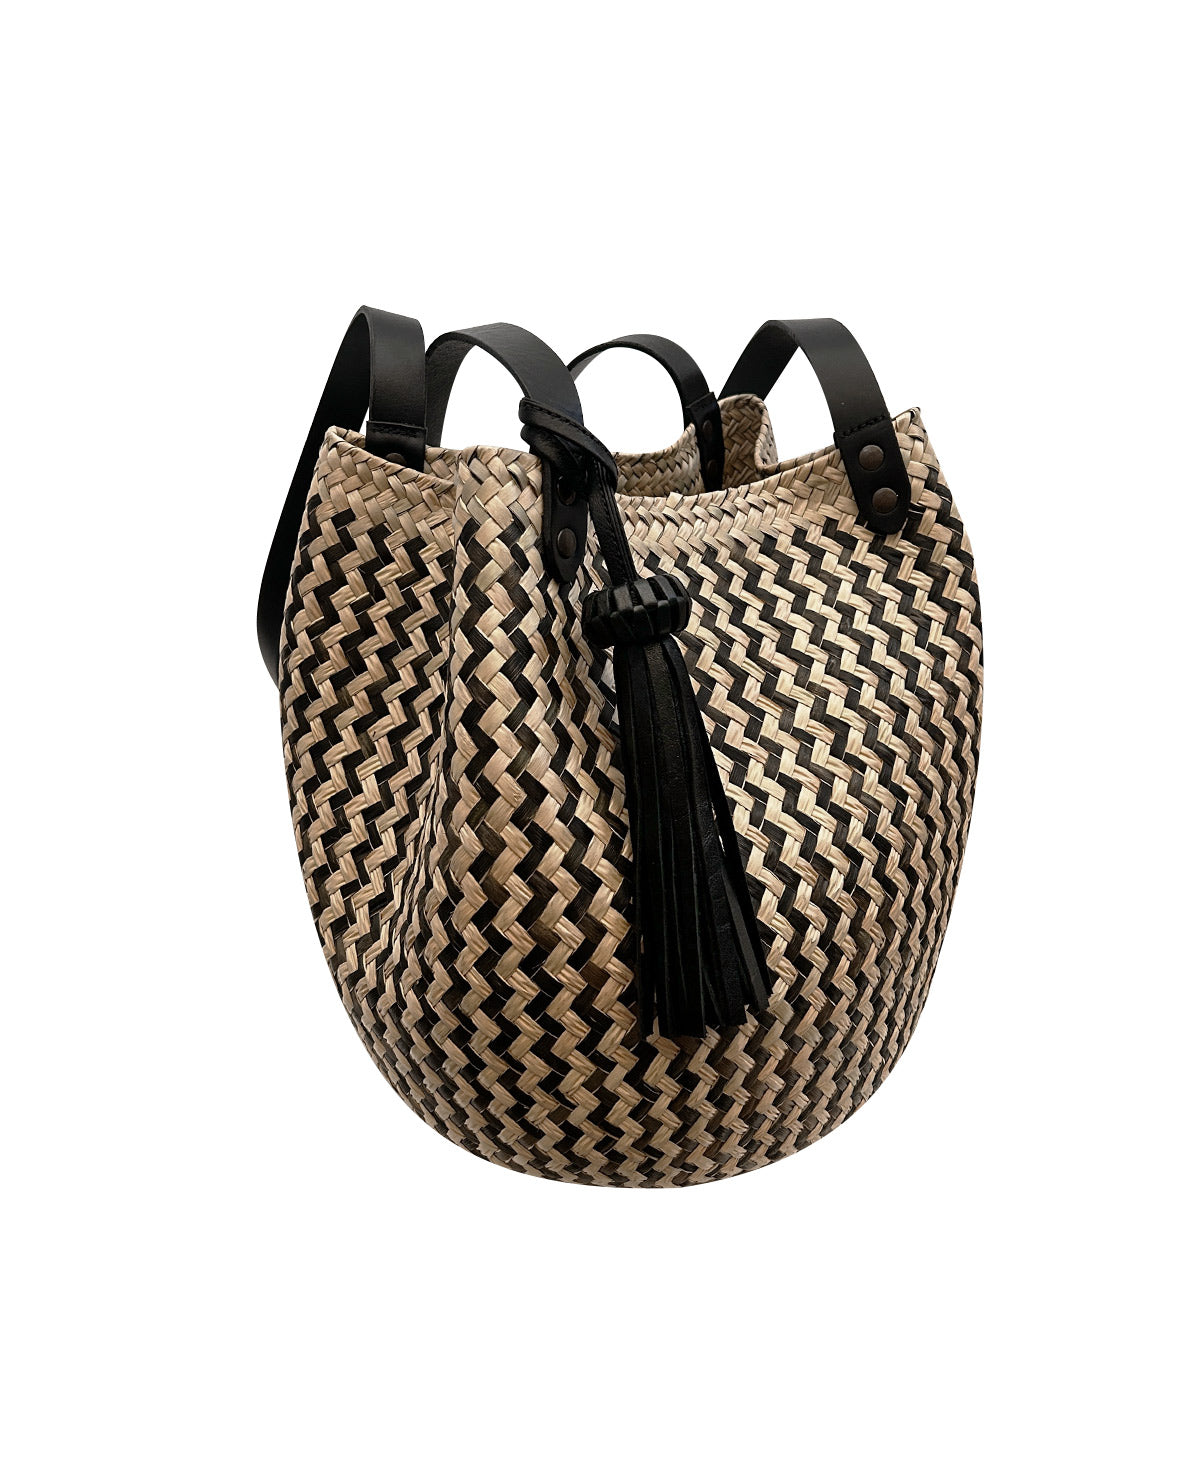 Products Lolita black leather bucket bag / black zigzag hand woven palm